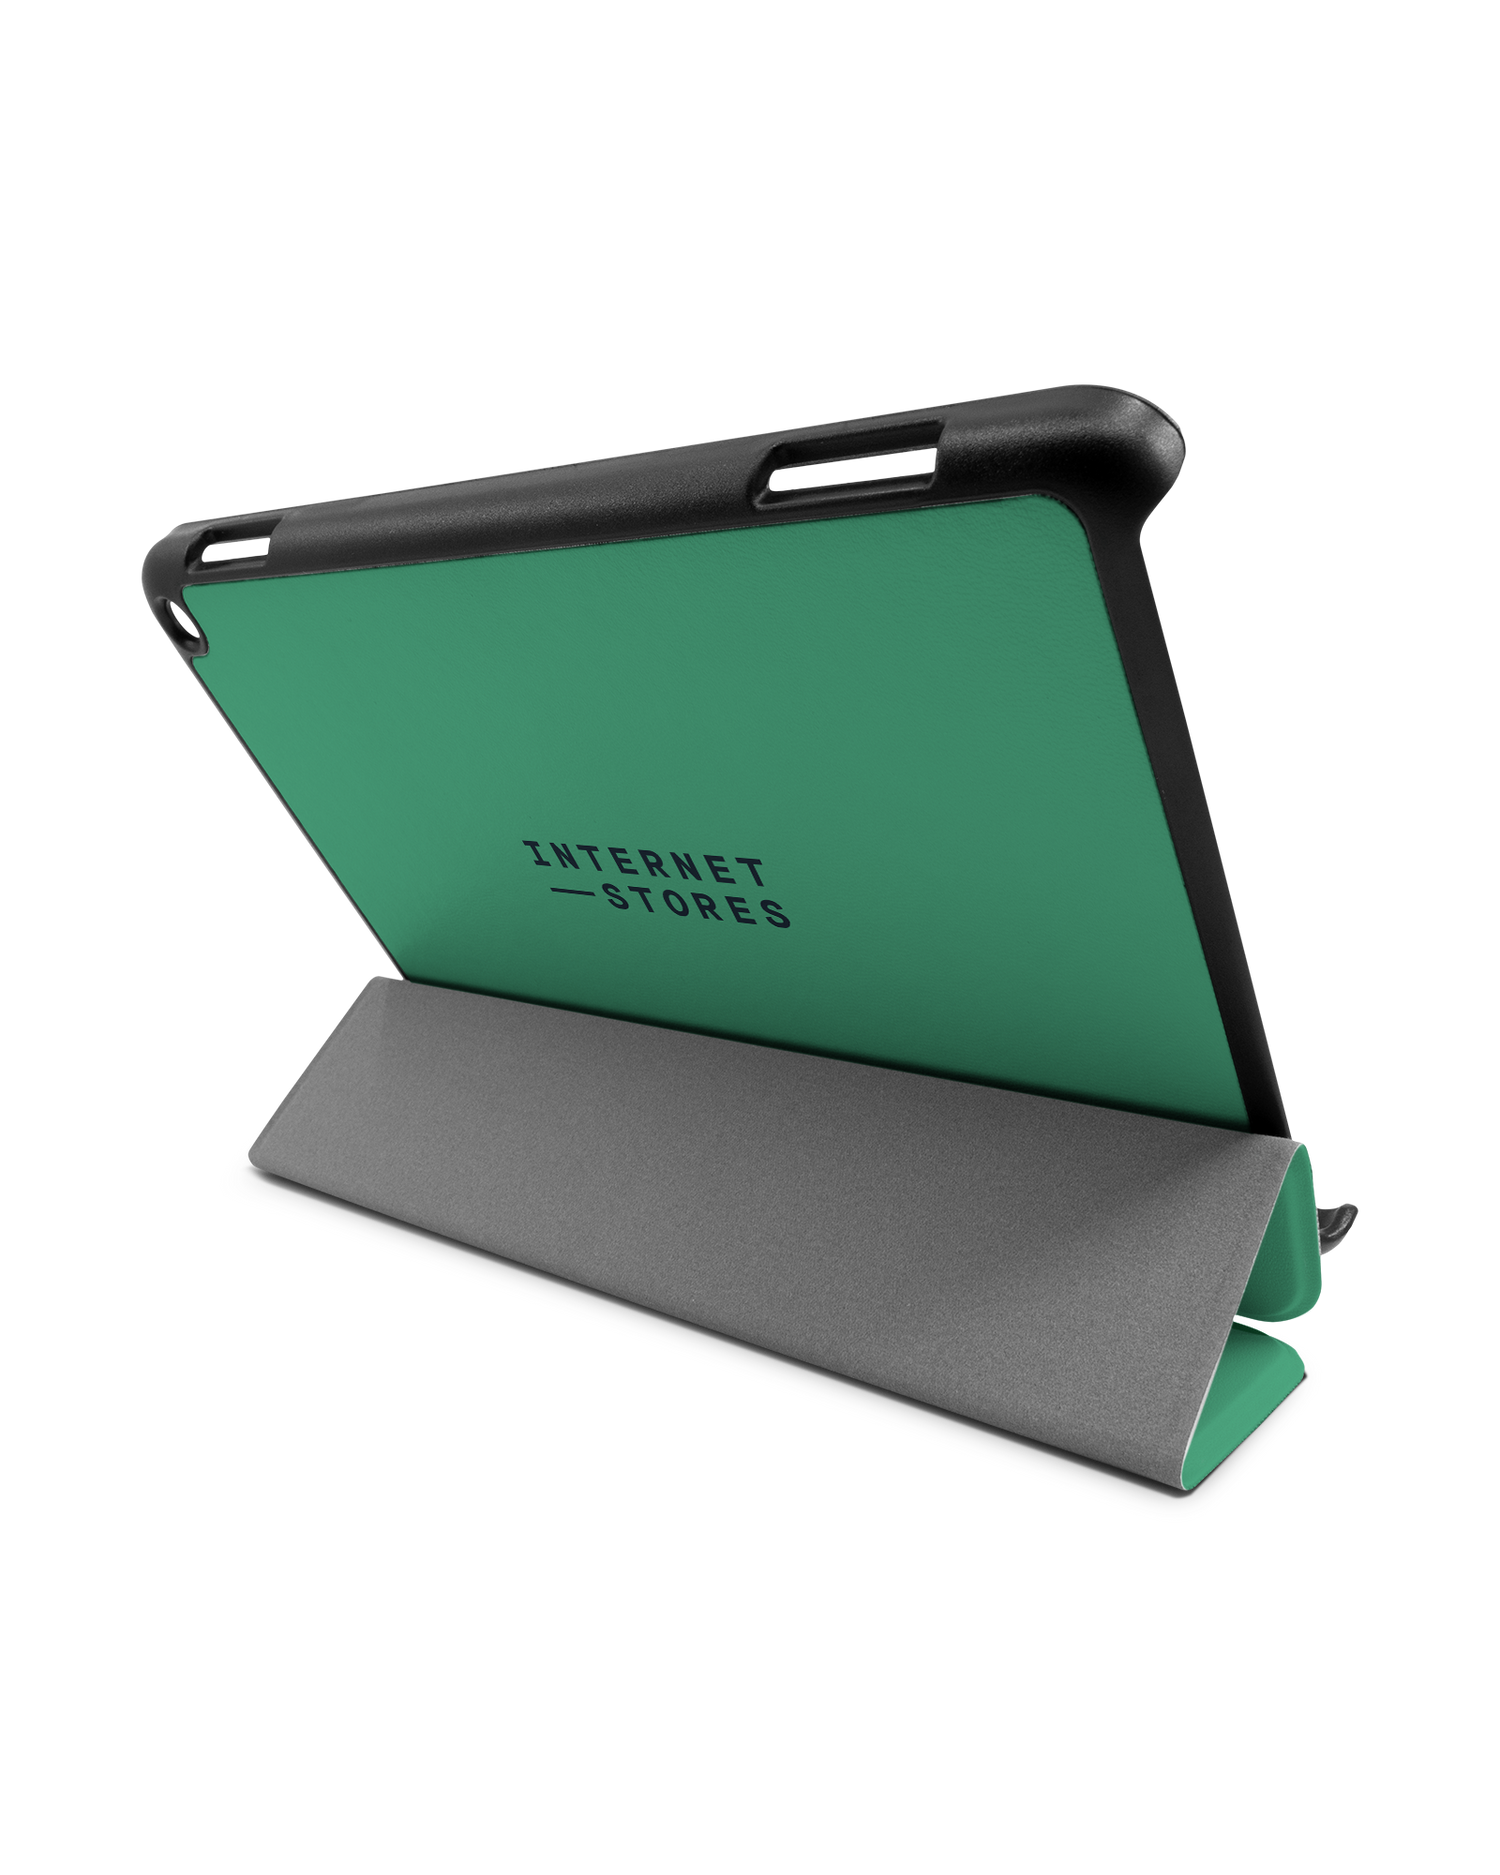 ISG Neon Green Tablet Smart Case for Amazon Fire HD 8 (2022), Amazon Fire HD 8 Plus (2022), Amazon Fire HD 8 (2020), Amazon Fire HD 8 Plus (2020): Used as Stand